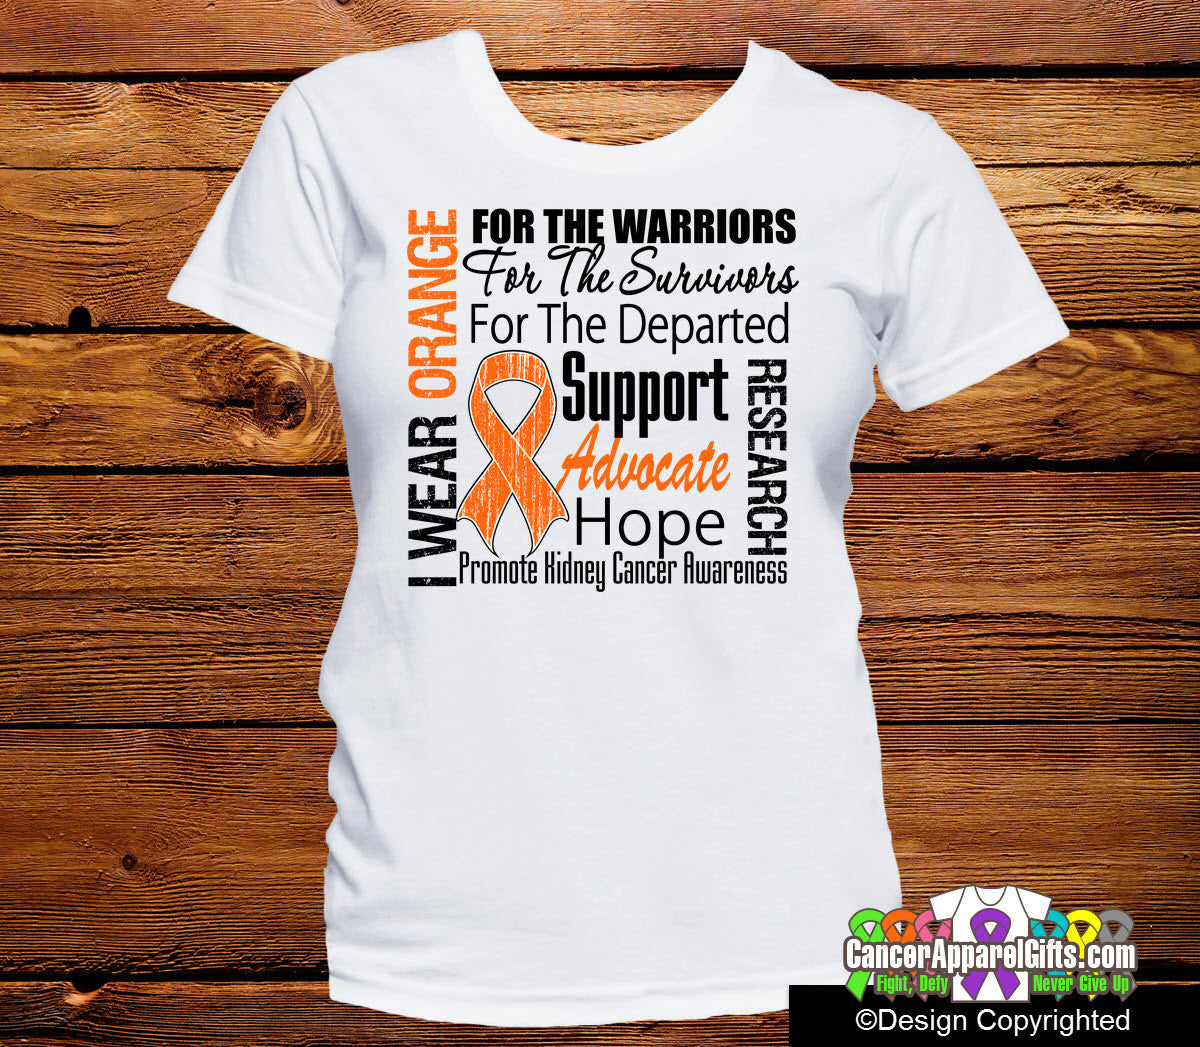 Kidney Cancer Tribute Shirts